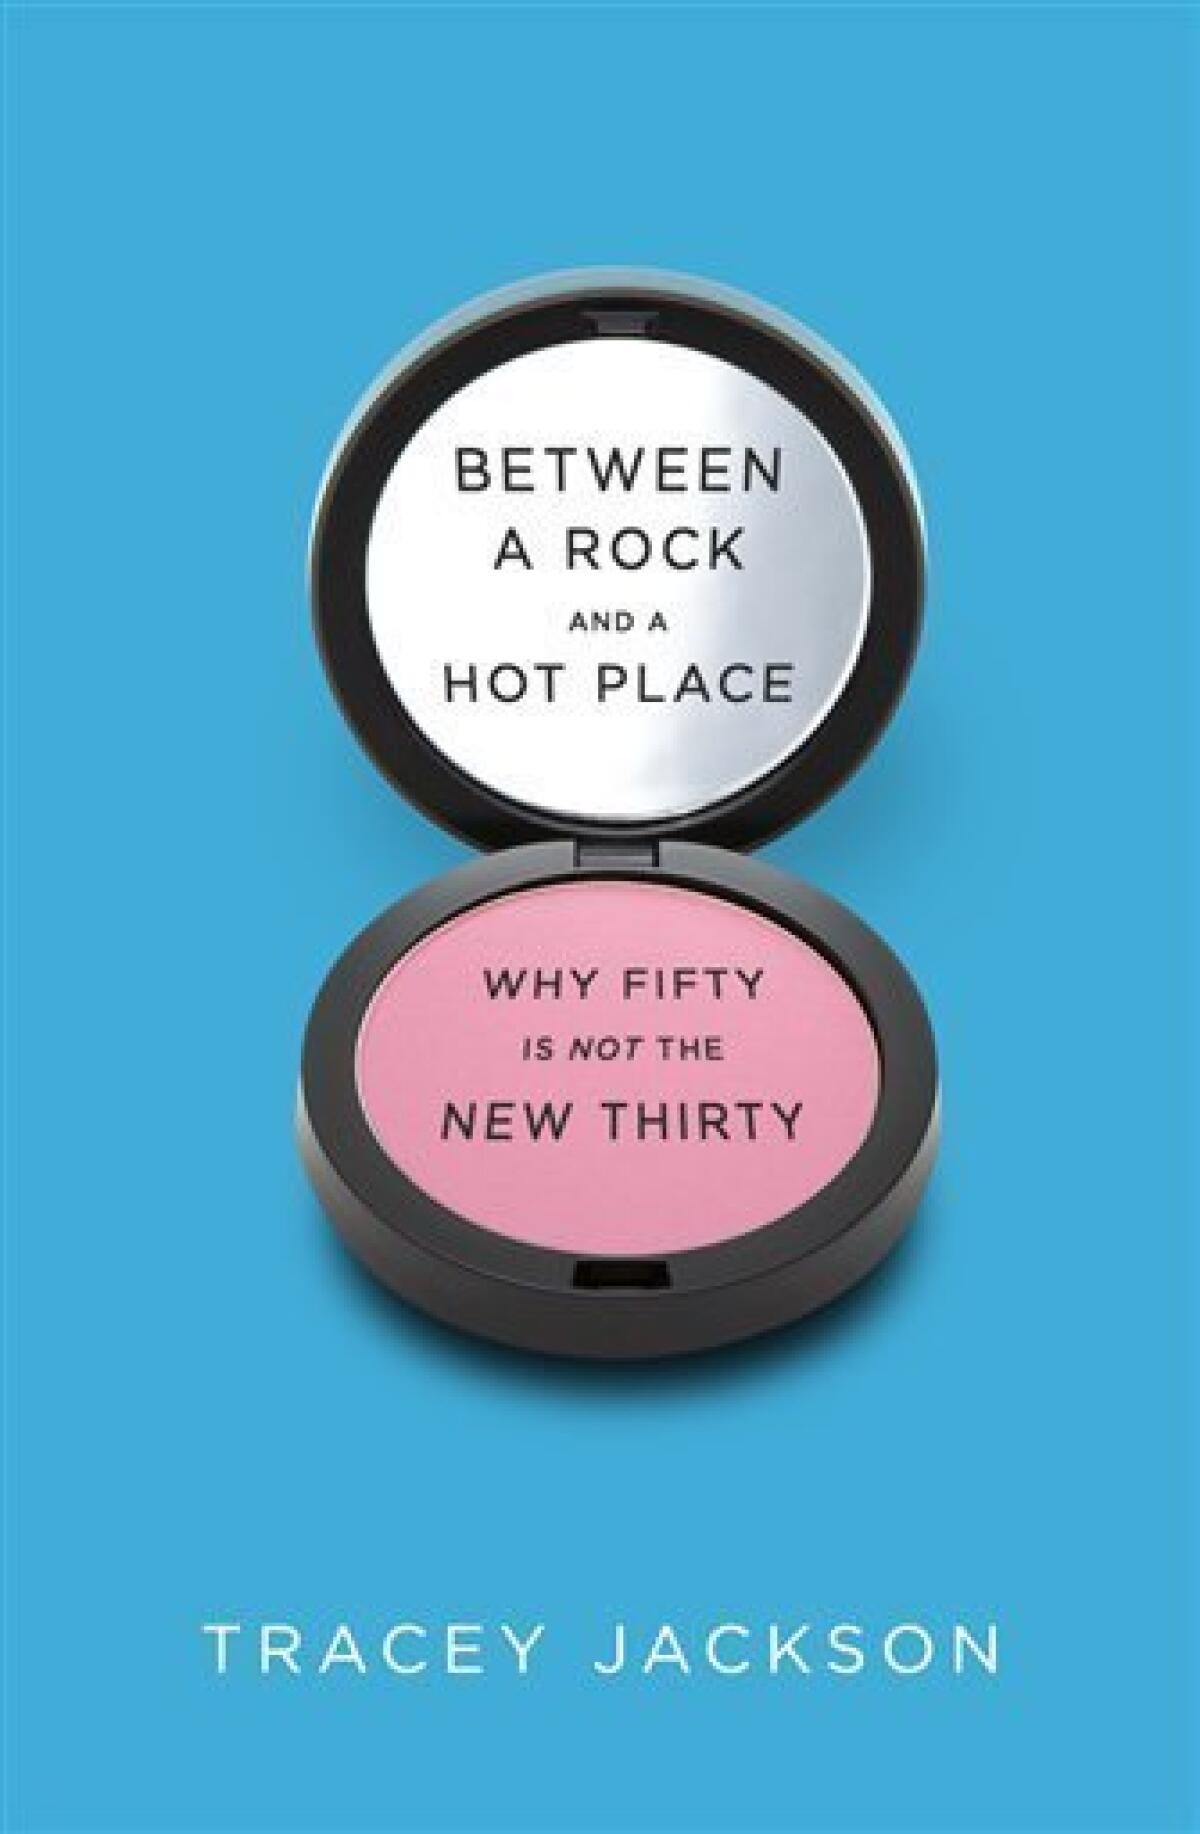 In this book cover image released by Harper, "Between a Rock and a Hot Place: Why Fifty Is Not the New Thirty" by Tracey Jackson, is shown. (AP Photo/Harper)